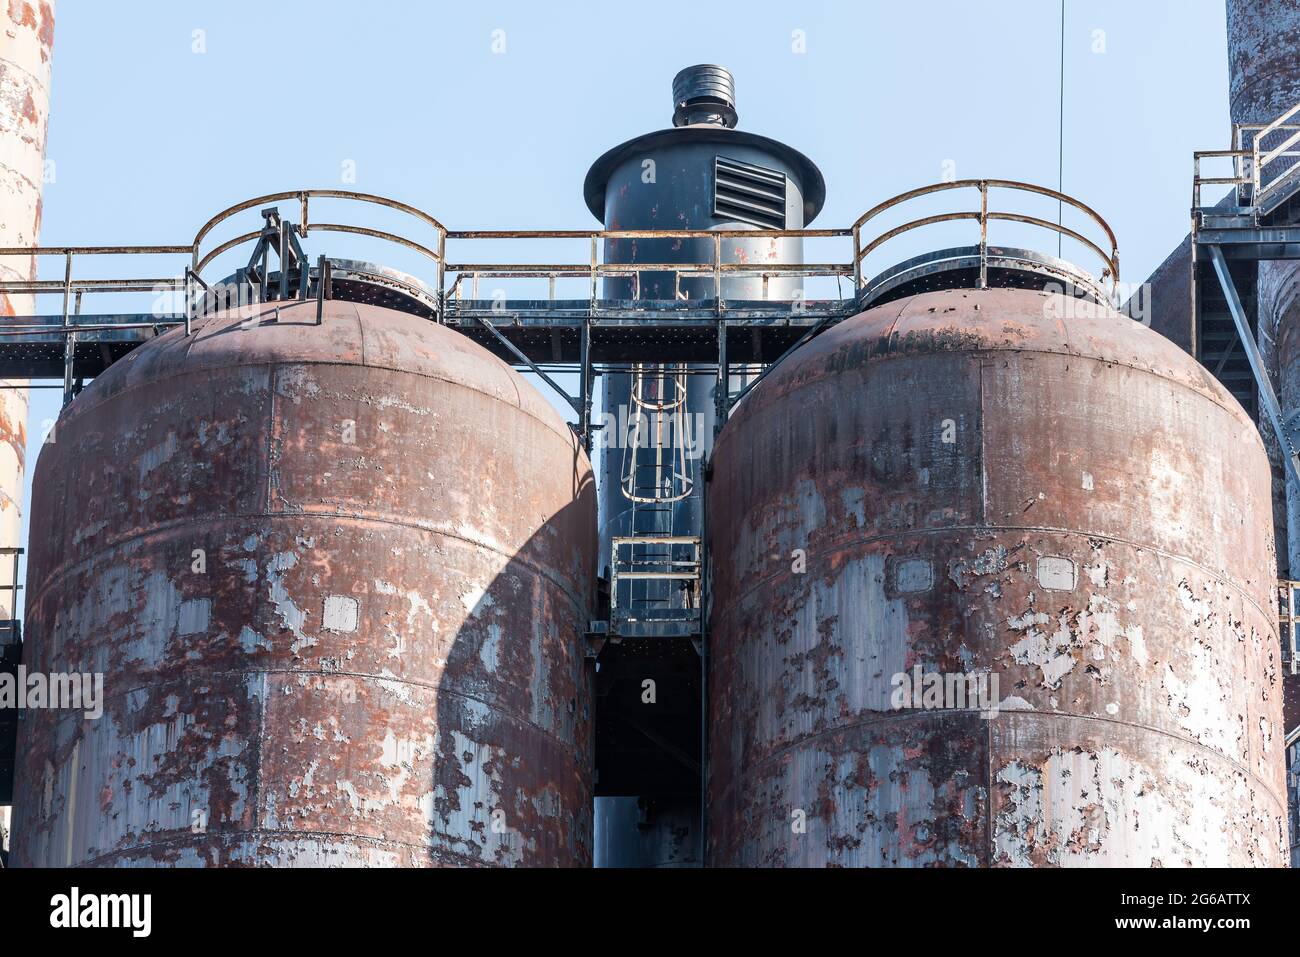 Two large steel tanks, abandoned, at an old steel factory in Pennsylvania. Stock Photo